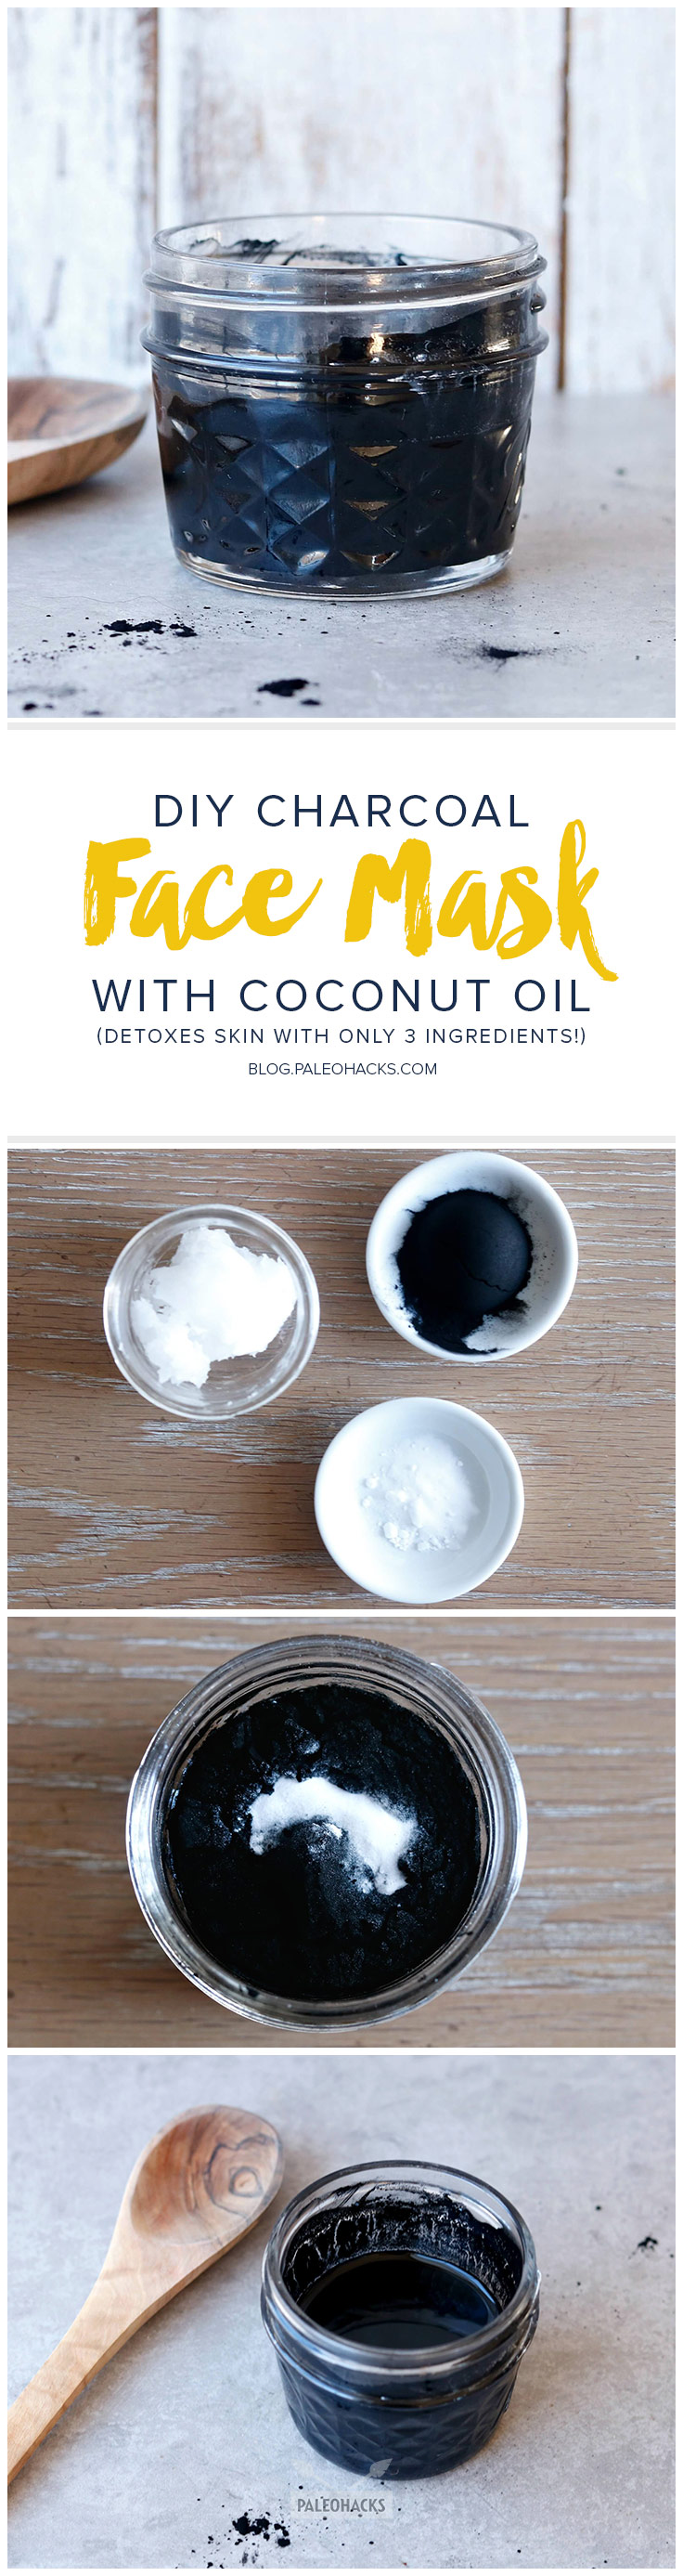 DIY Charcoal Face Mask with Coconut Oil